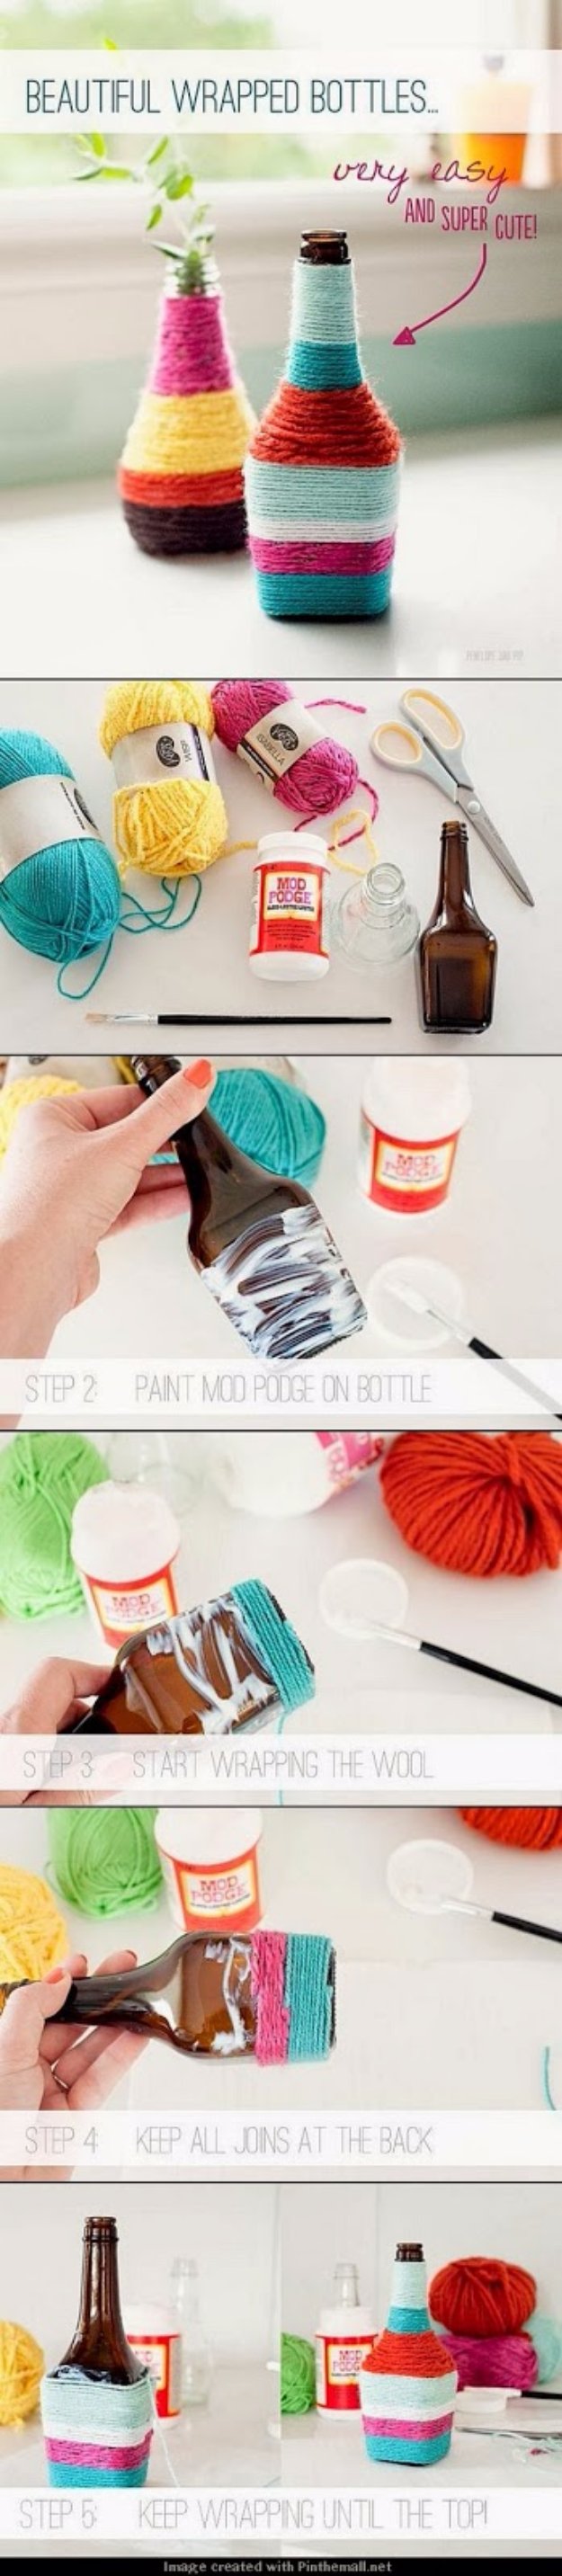 Crafts to Make and Sell - Beautiful Wrapped Bottles DIY - Cool and Cheap Craft Projects and DIY Ideas for Teens and Adults to Make and Sell - Fun, Cool and Creative Ways for Teenagers to Make Money Selling Stuff to Make #teencrafts #diyideas #craftstosell